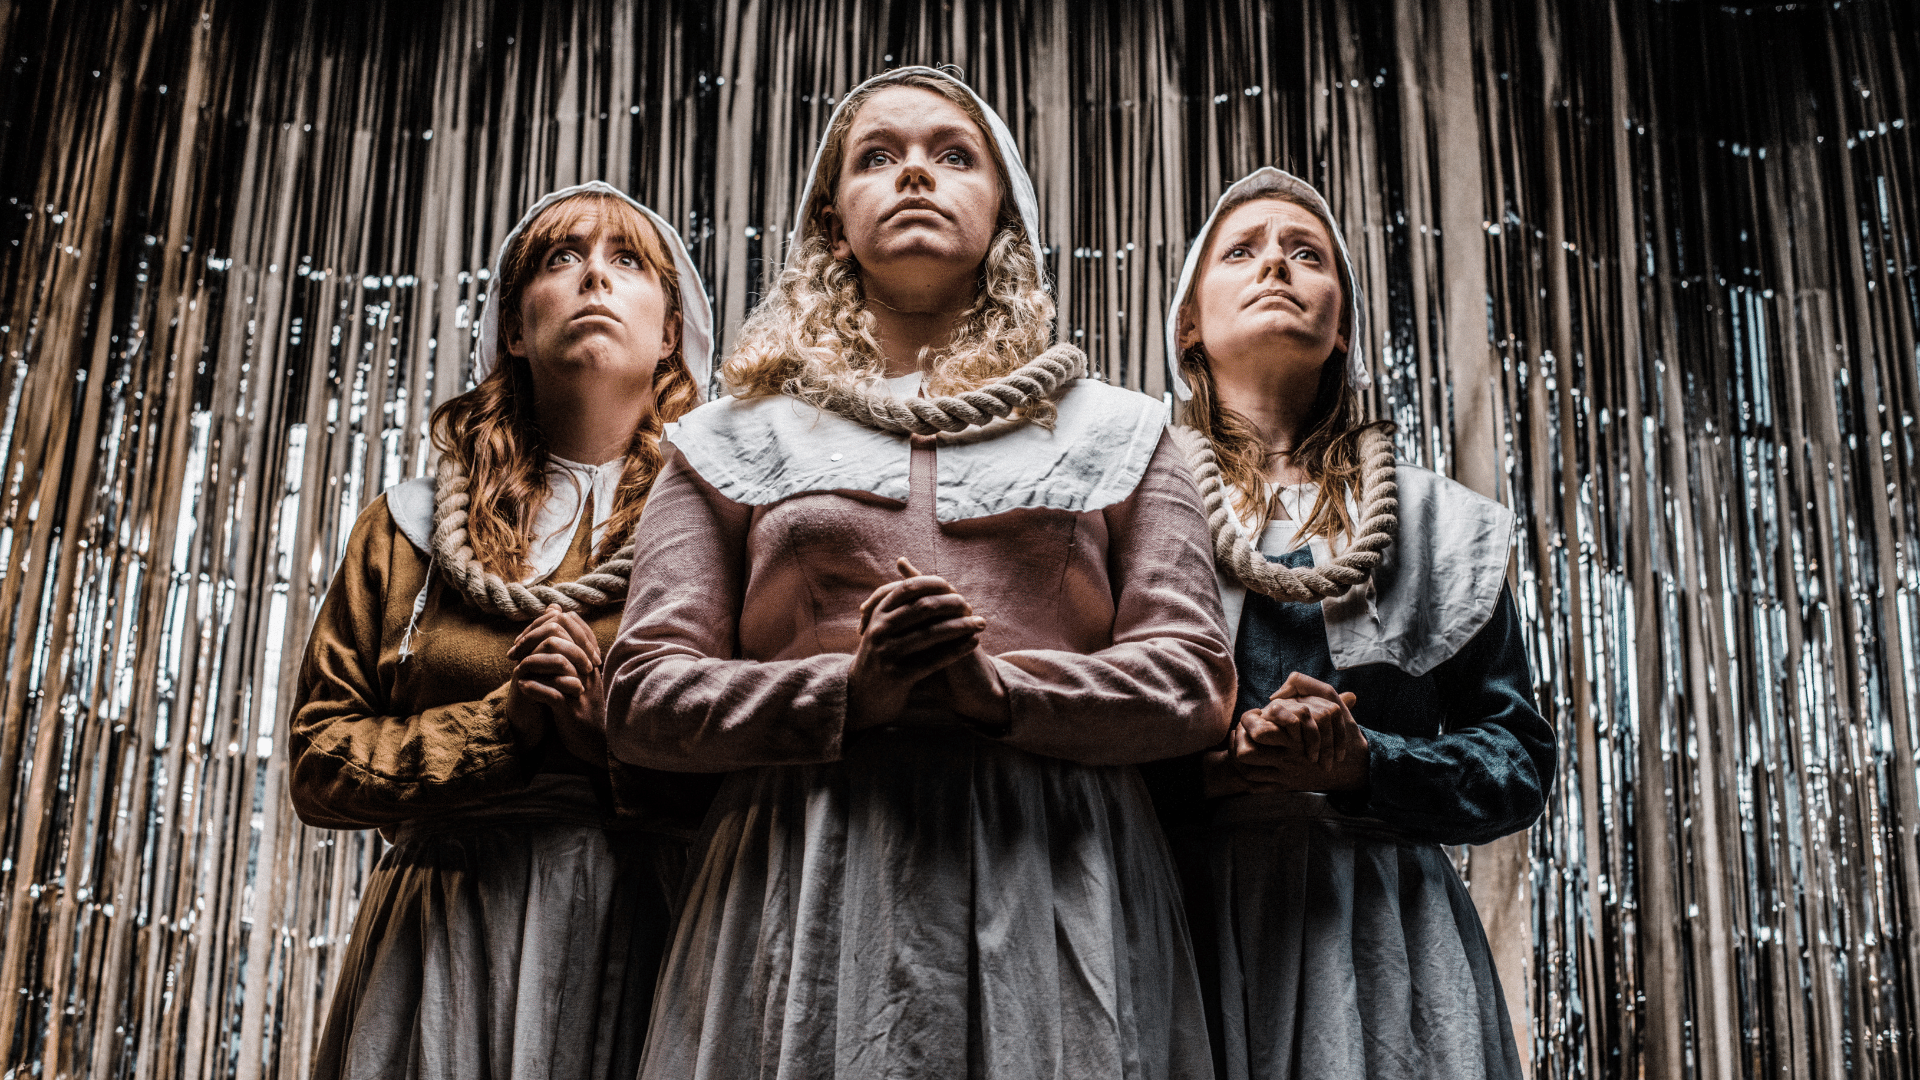 Hags promo photo. A low-angle shot, looking up at three performers in medieval puritan dress, clasping their hands in prayer and looking to the heavens with pious expressions. The background is a silver glittery curtain.